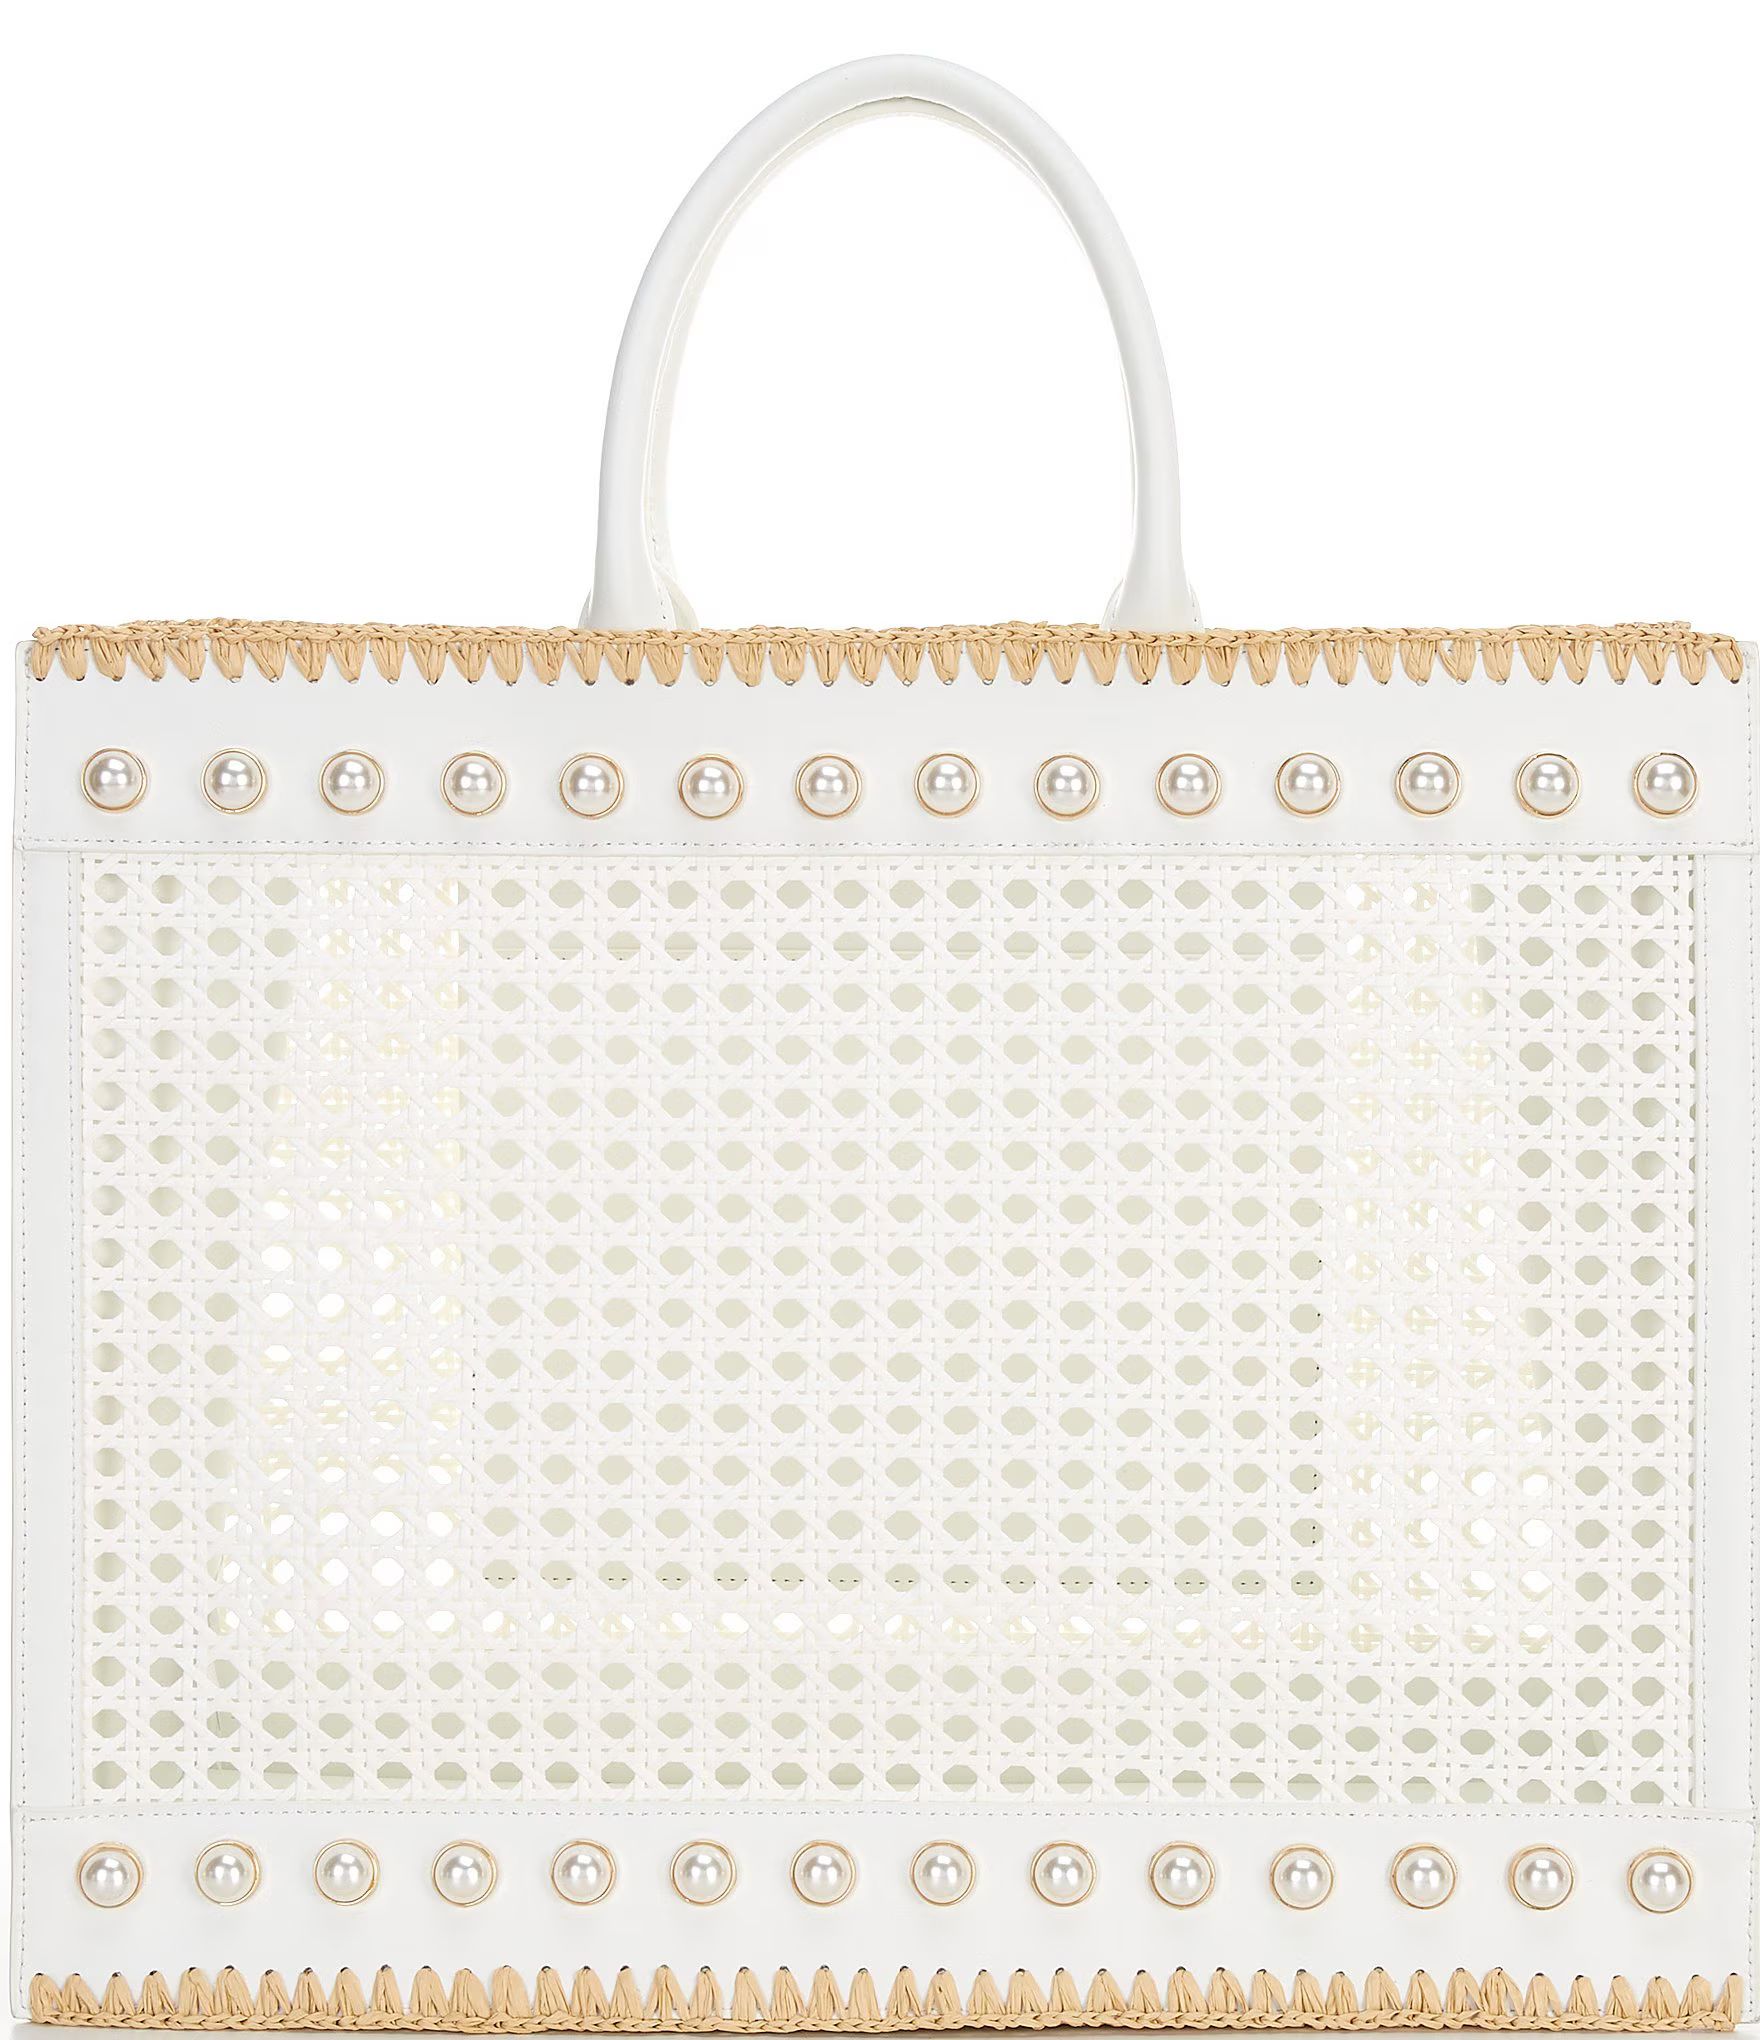 Woven Caned Leather Ellie Large Pearl Tote Bag | Dillard's